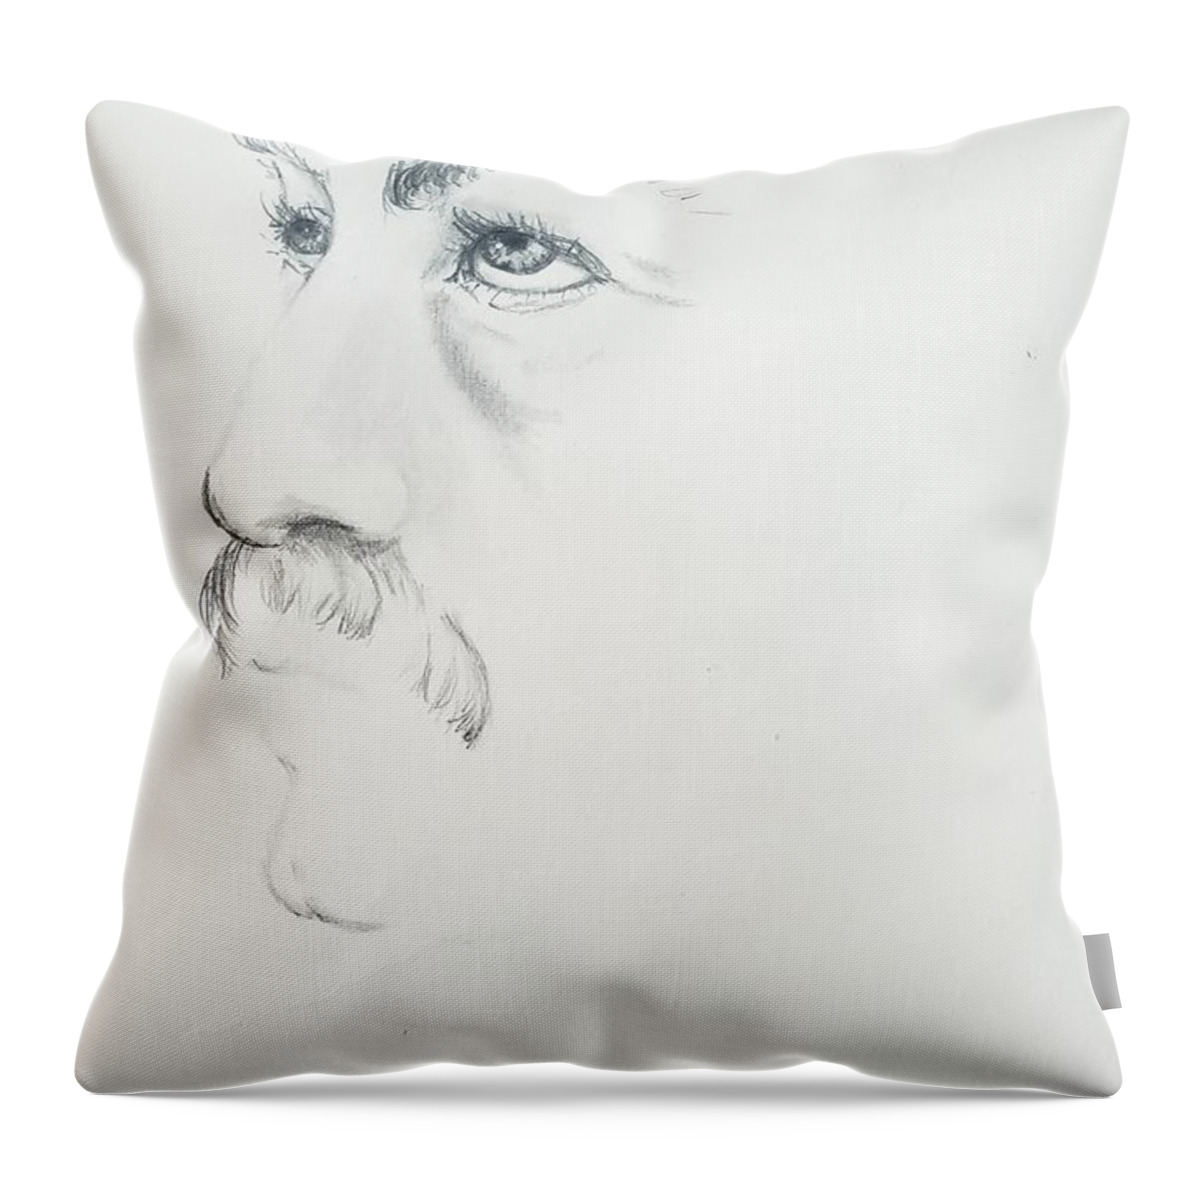 Portrait Throw Pillow featuring the drawing Eyebrow by Merana Cadorette